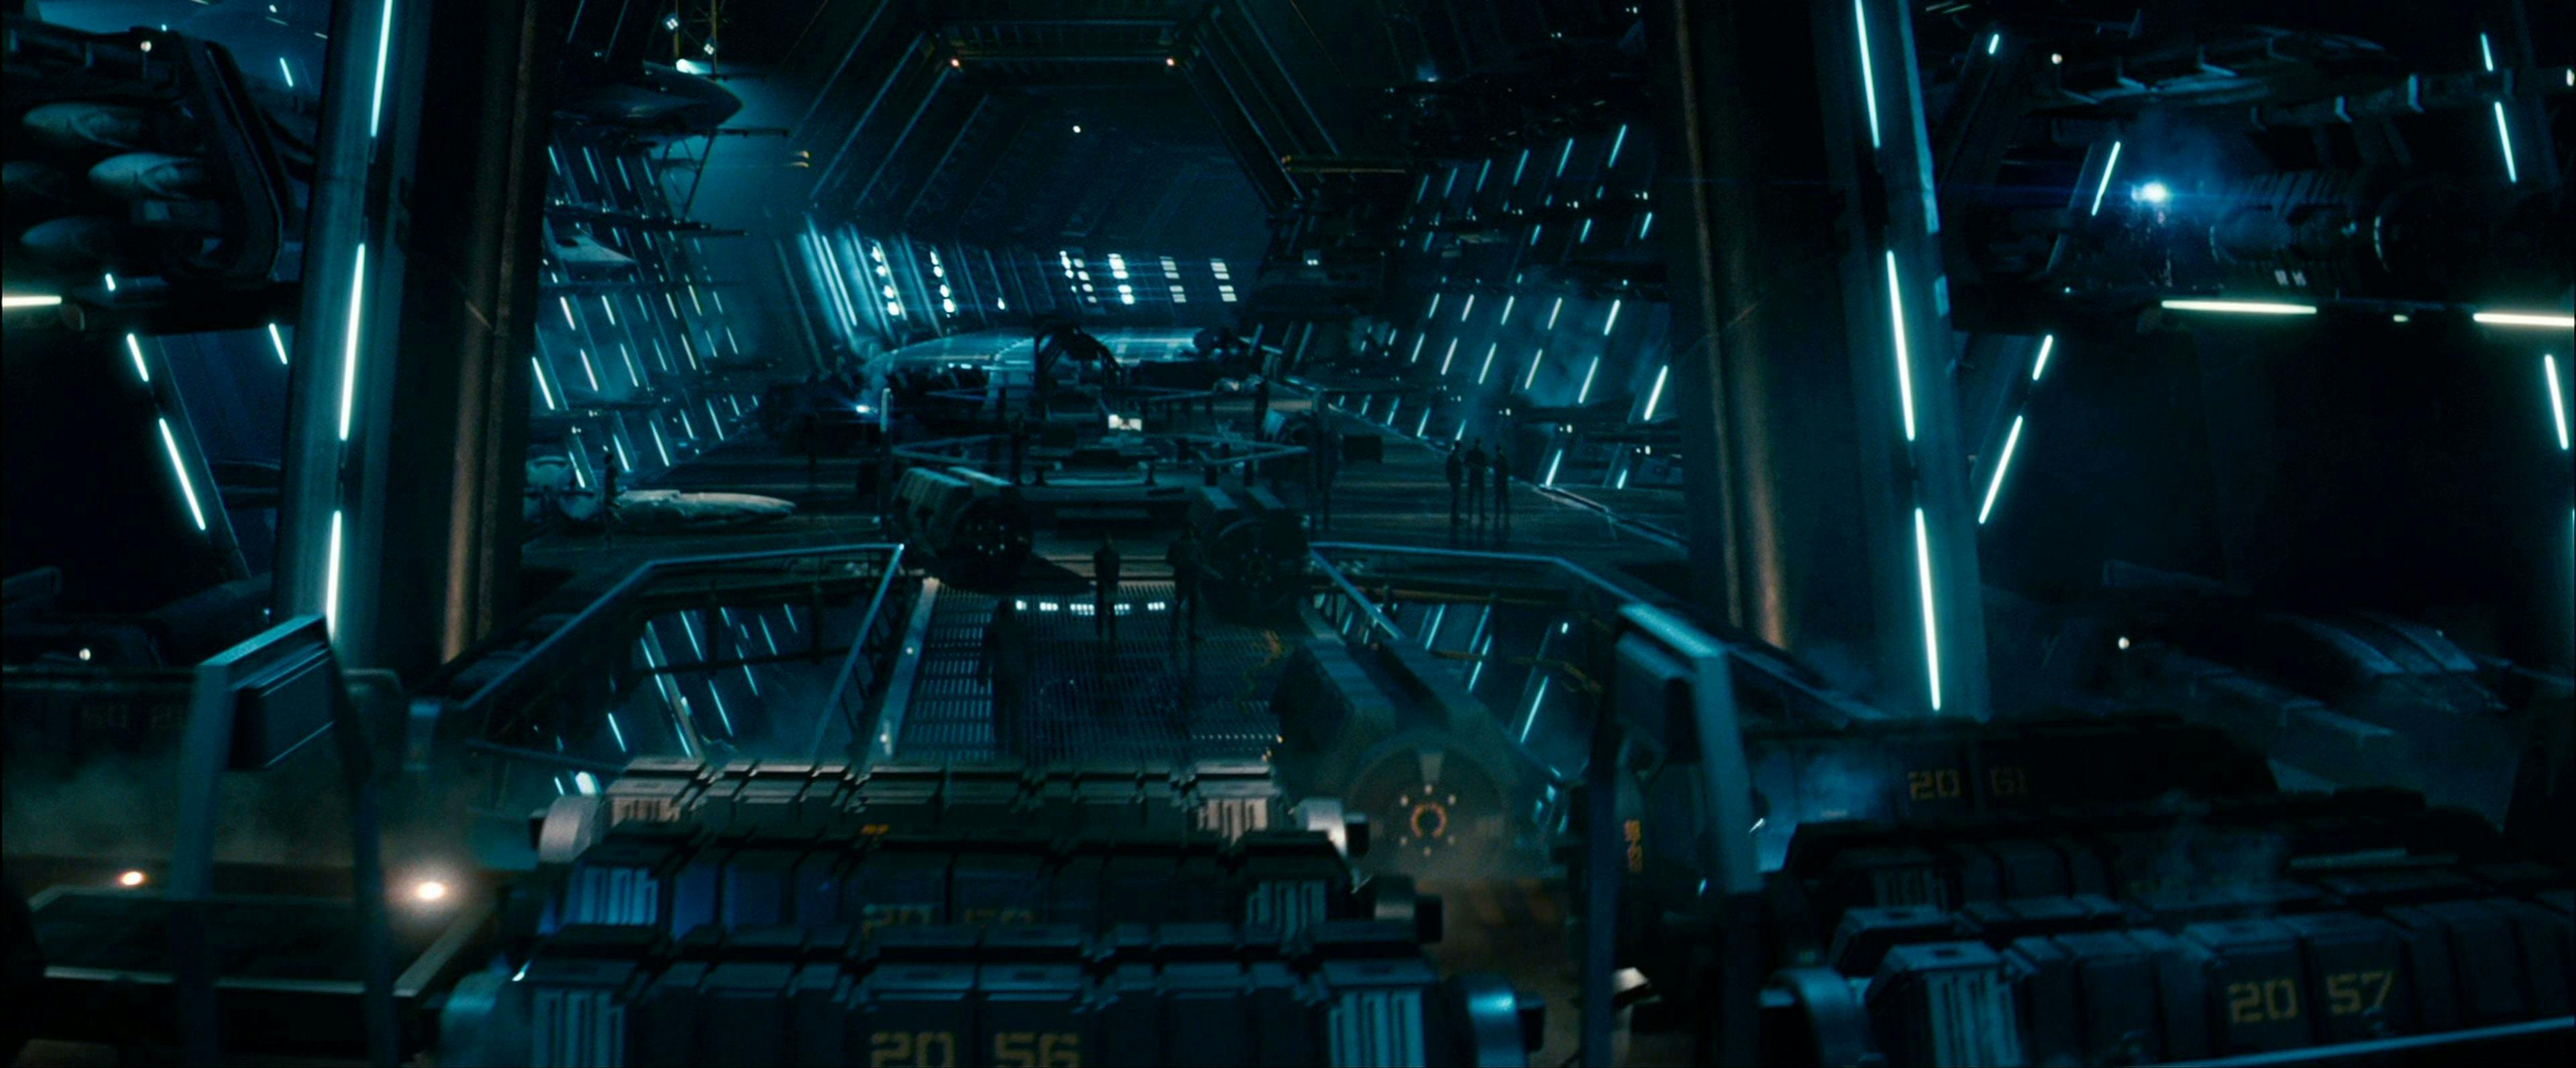 Beneath the Kelvin Memorial Archive is a secret base for Section 31 in Star Trek Into Darkness